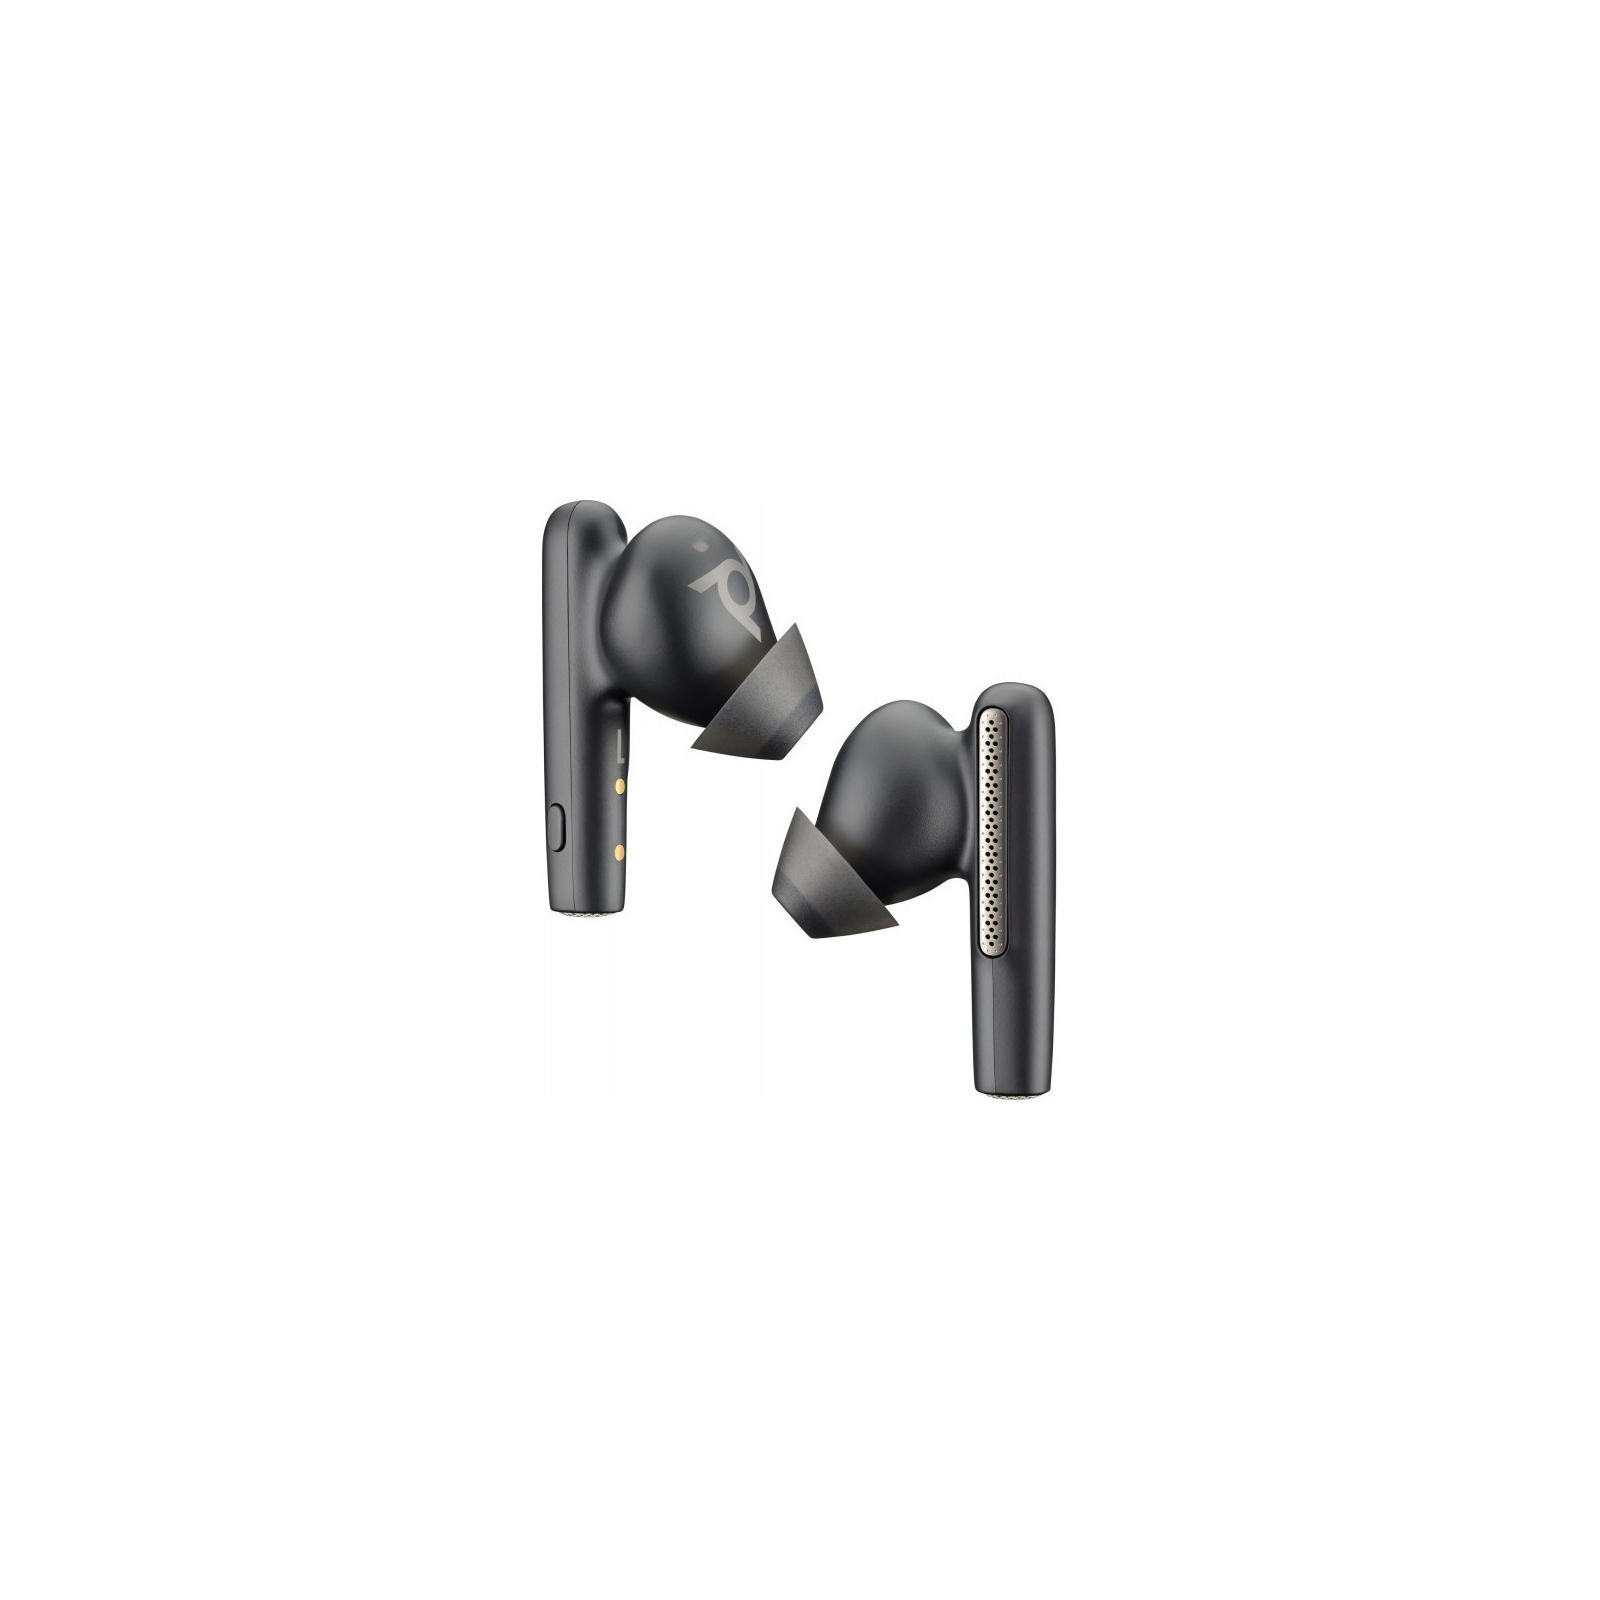 Наушники Poly Voyager Free 60+ Earbuds + BT700C + TSCHC Black (7Y8G4AA)